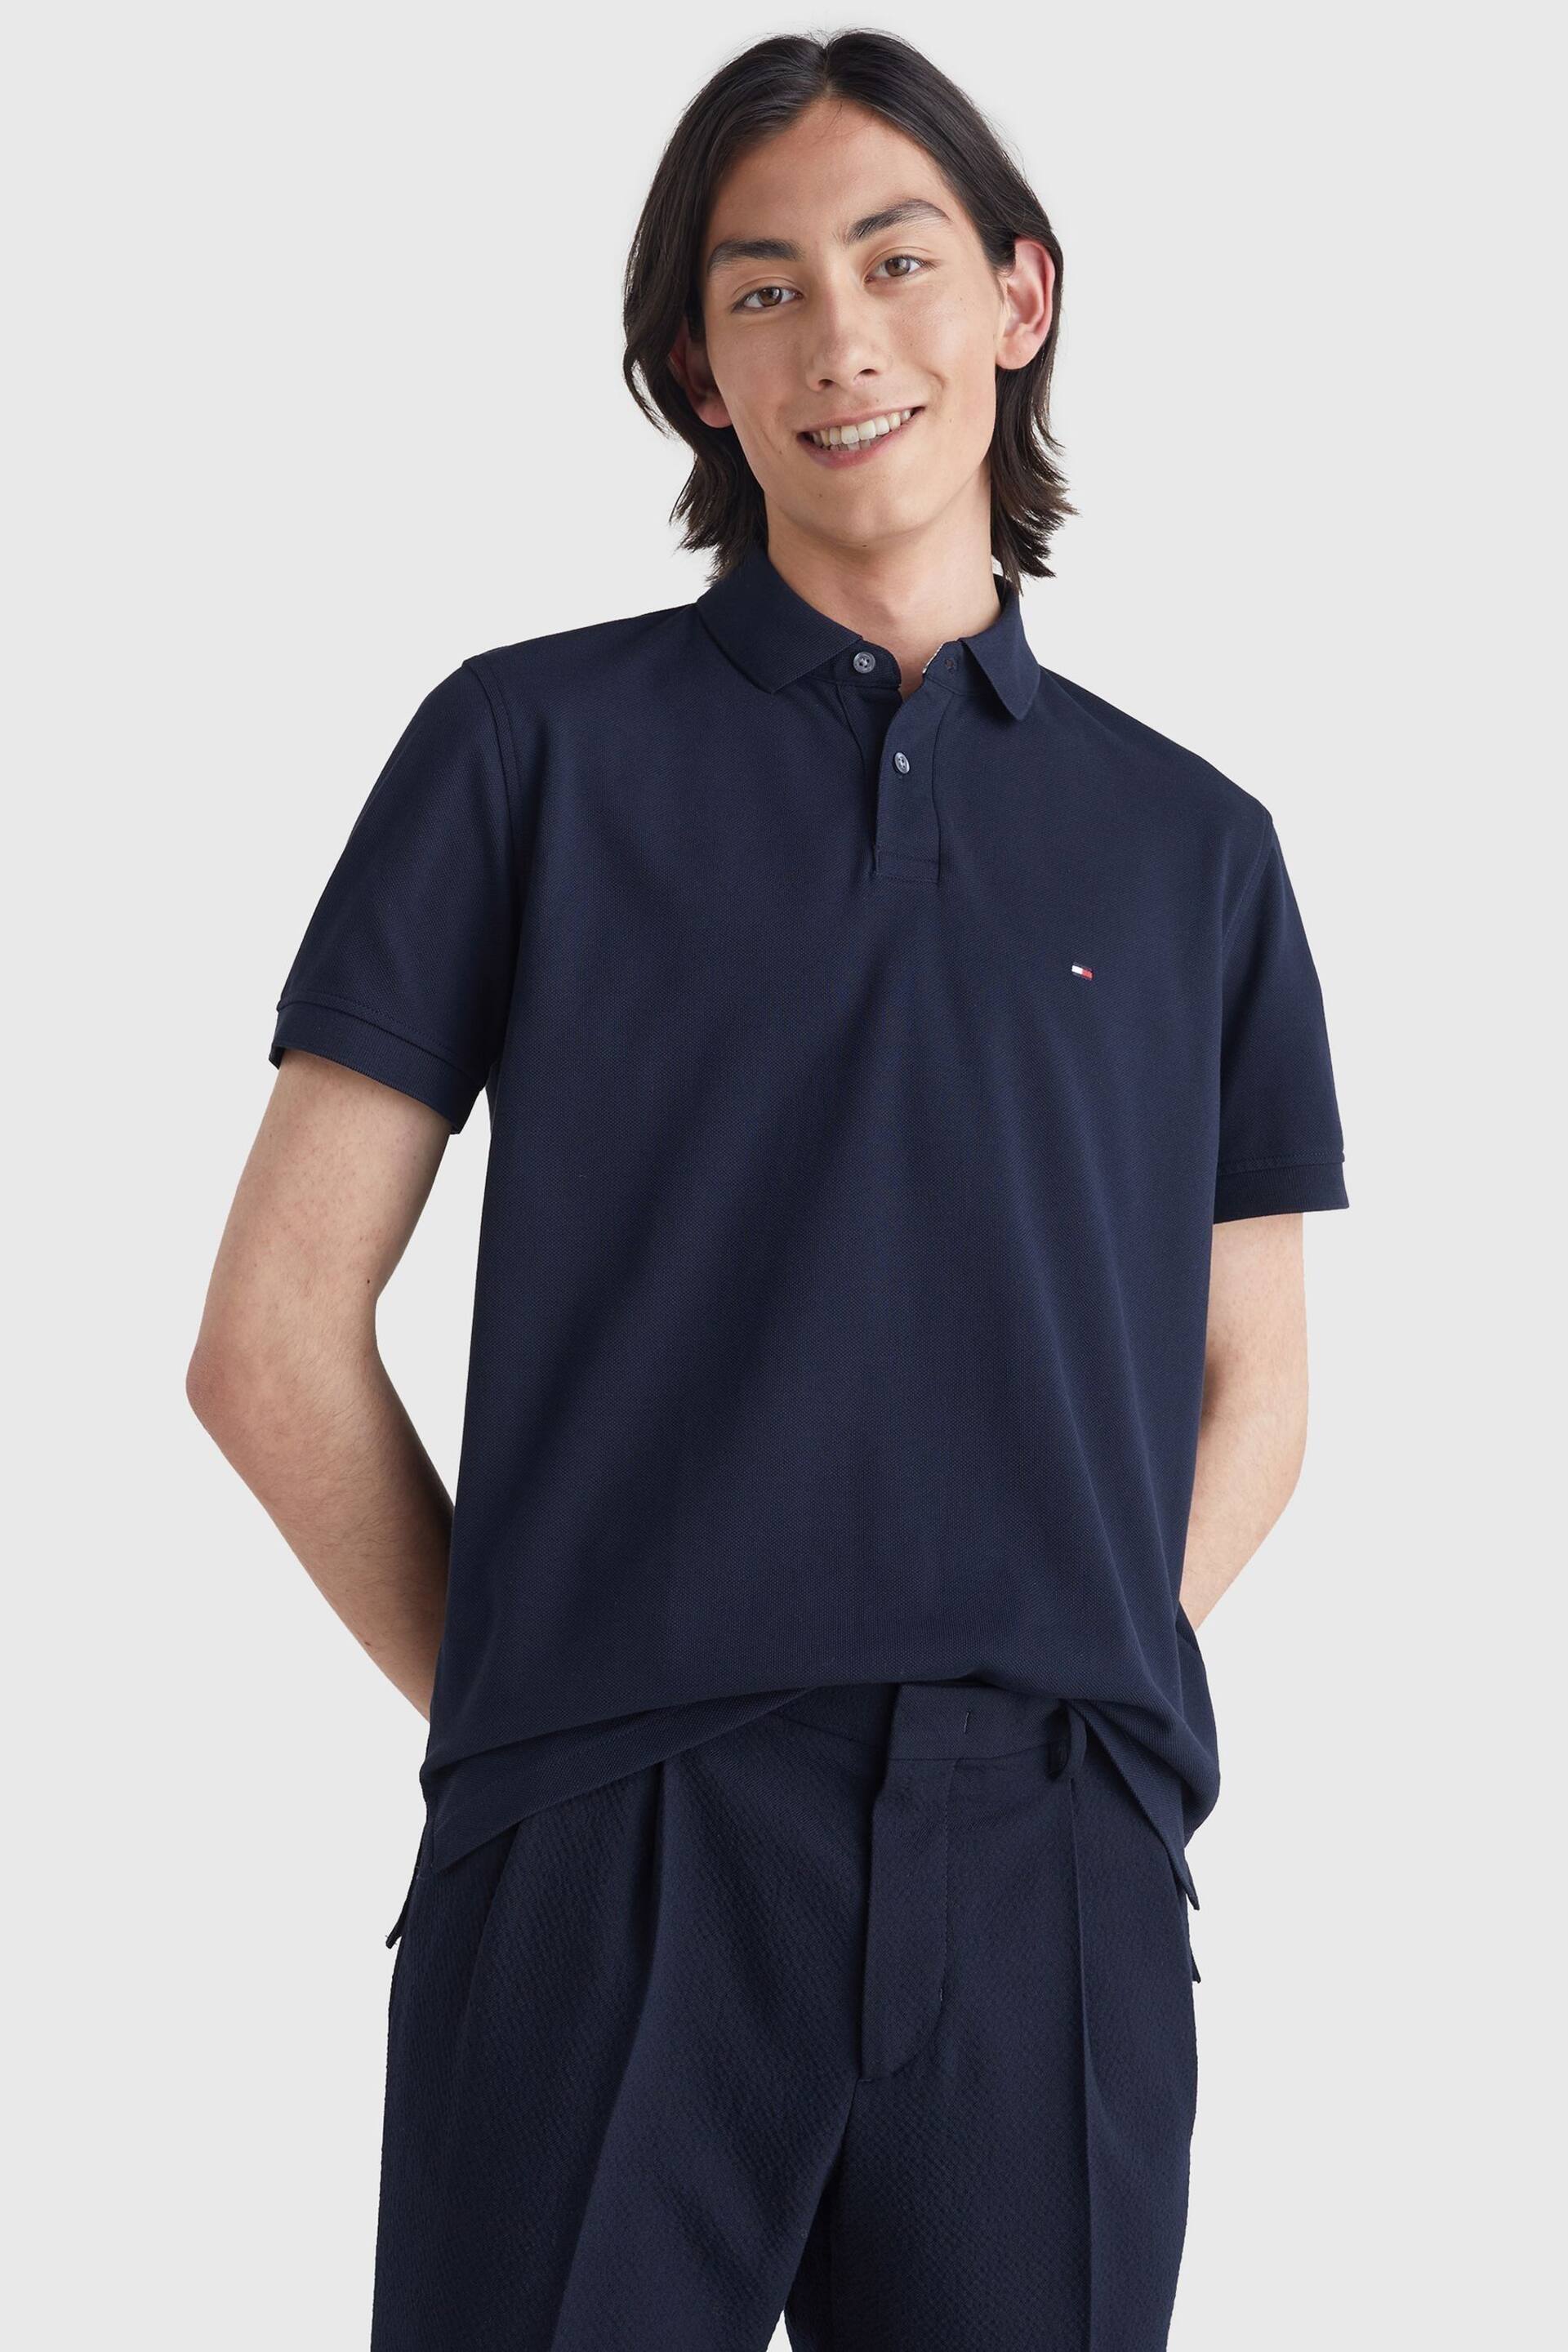 Tommy Hilfiger Blue 1985 Polo Shirt - Image 1 of 5